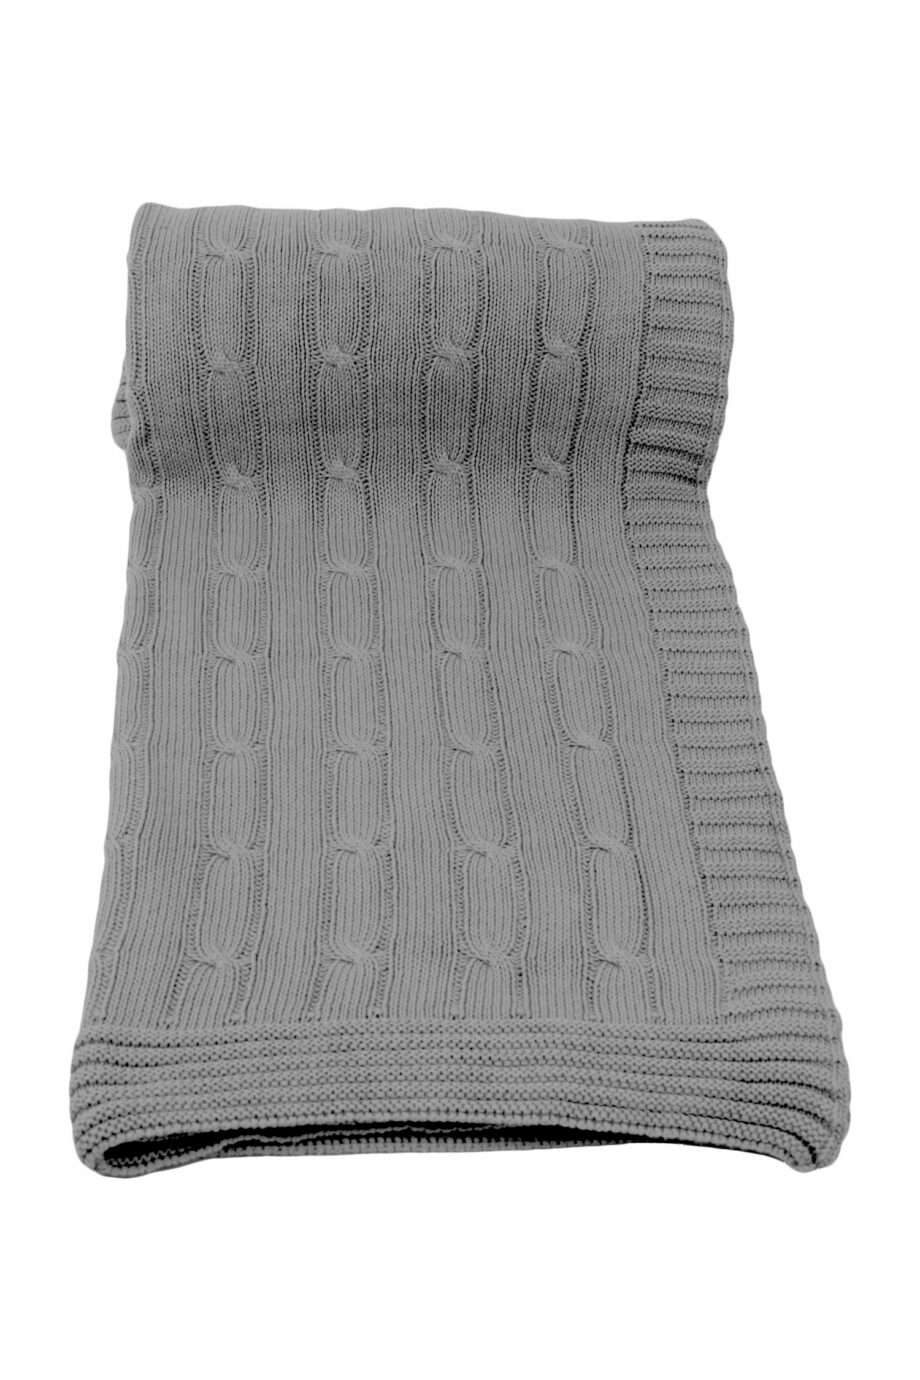 twist grey knitted cotton throw large